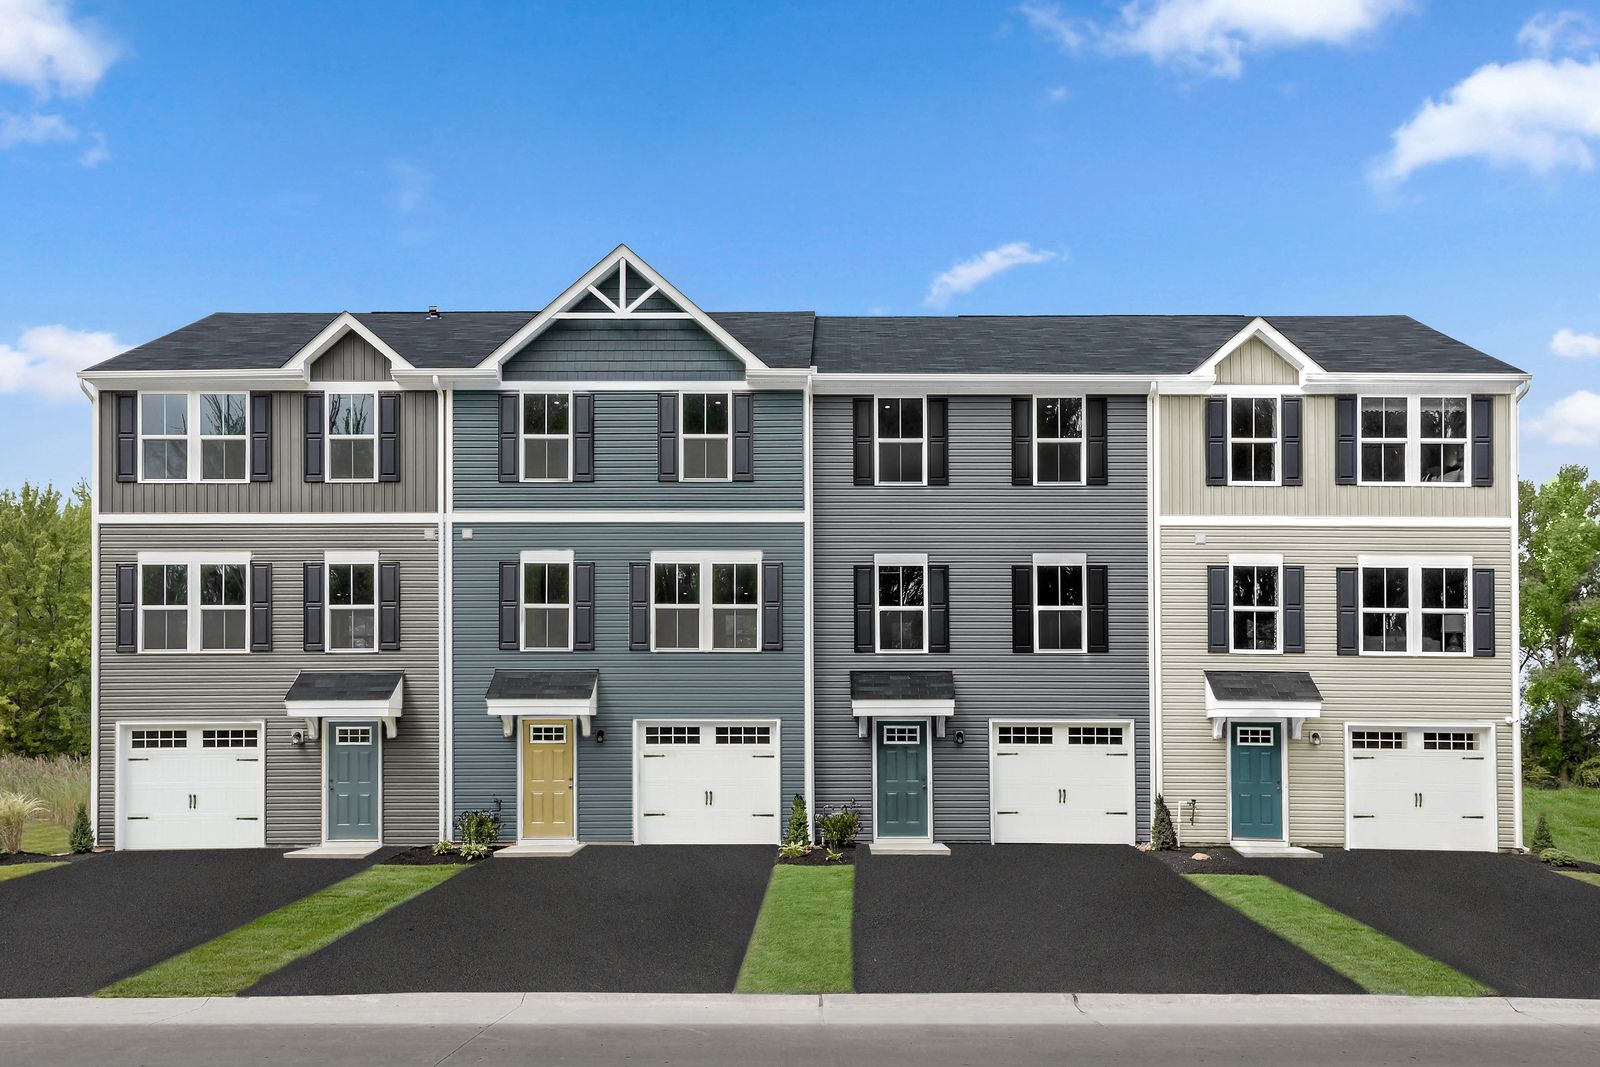 WELCOME TO MARTINSBURG LAKES TOWNHOMES